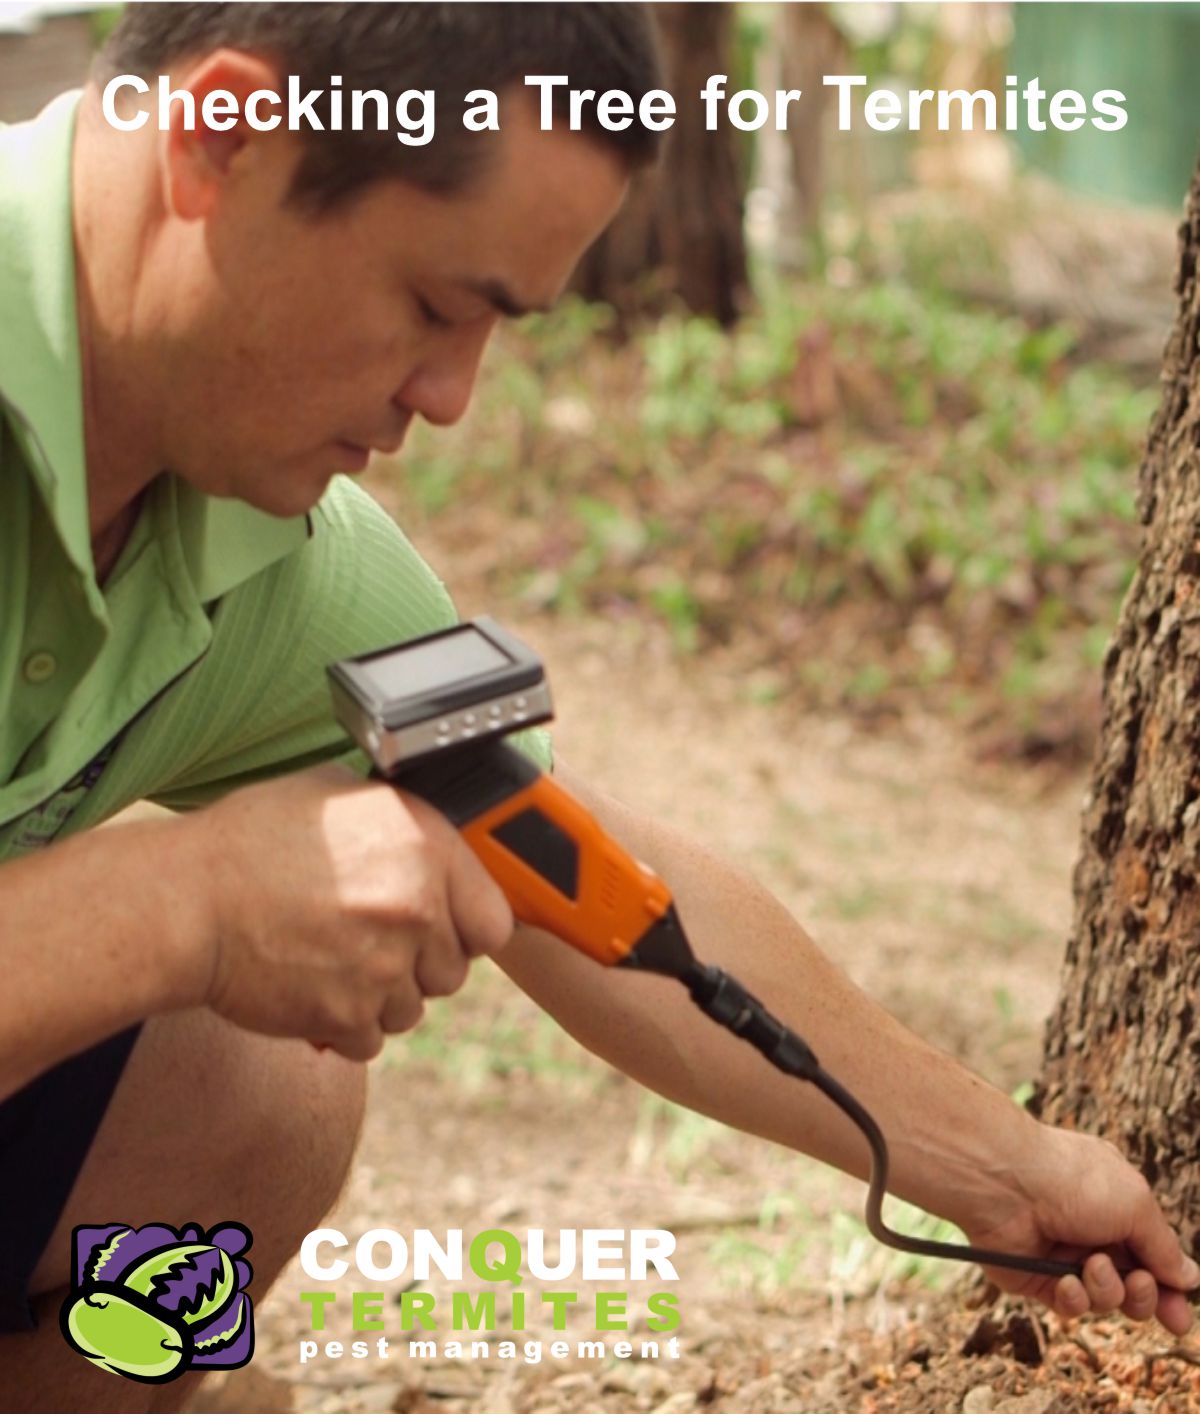 Checking with a borescope for termites in a tree